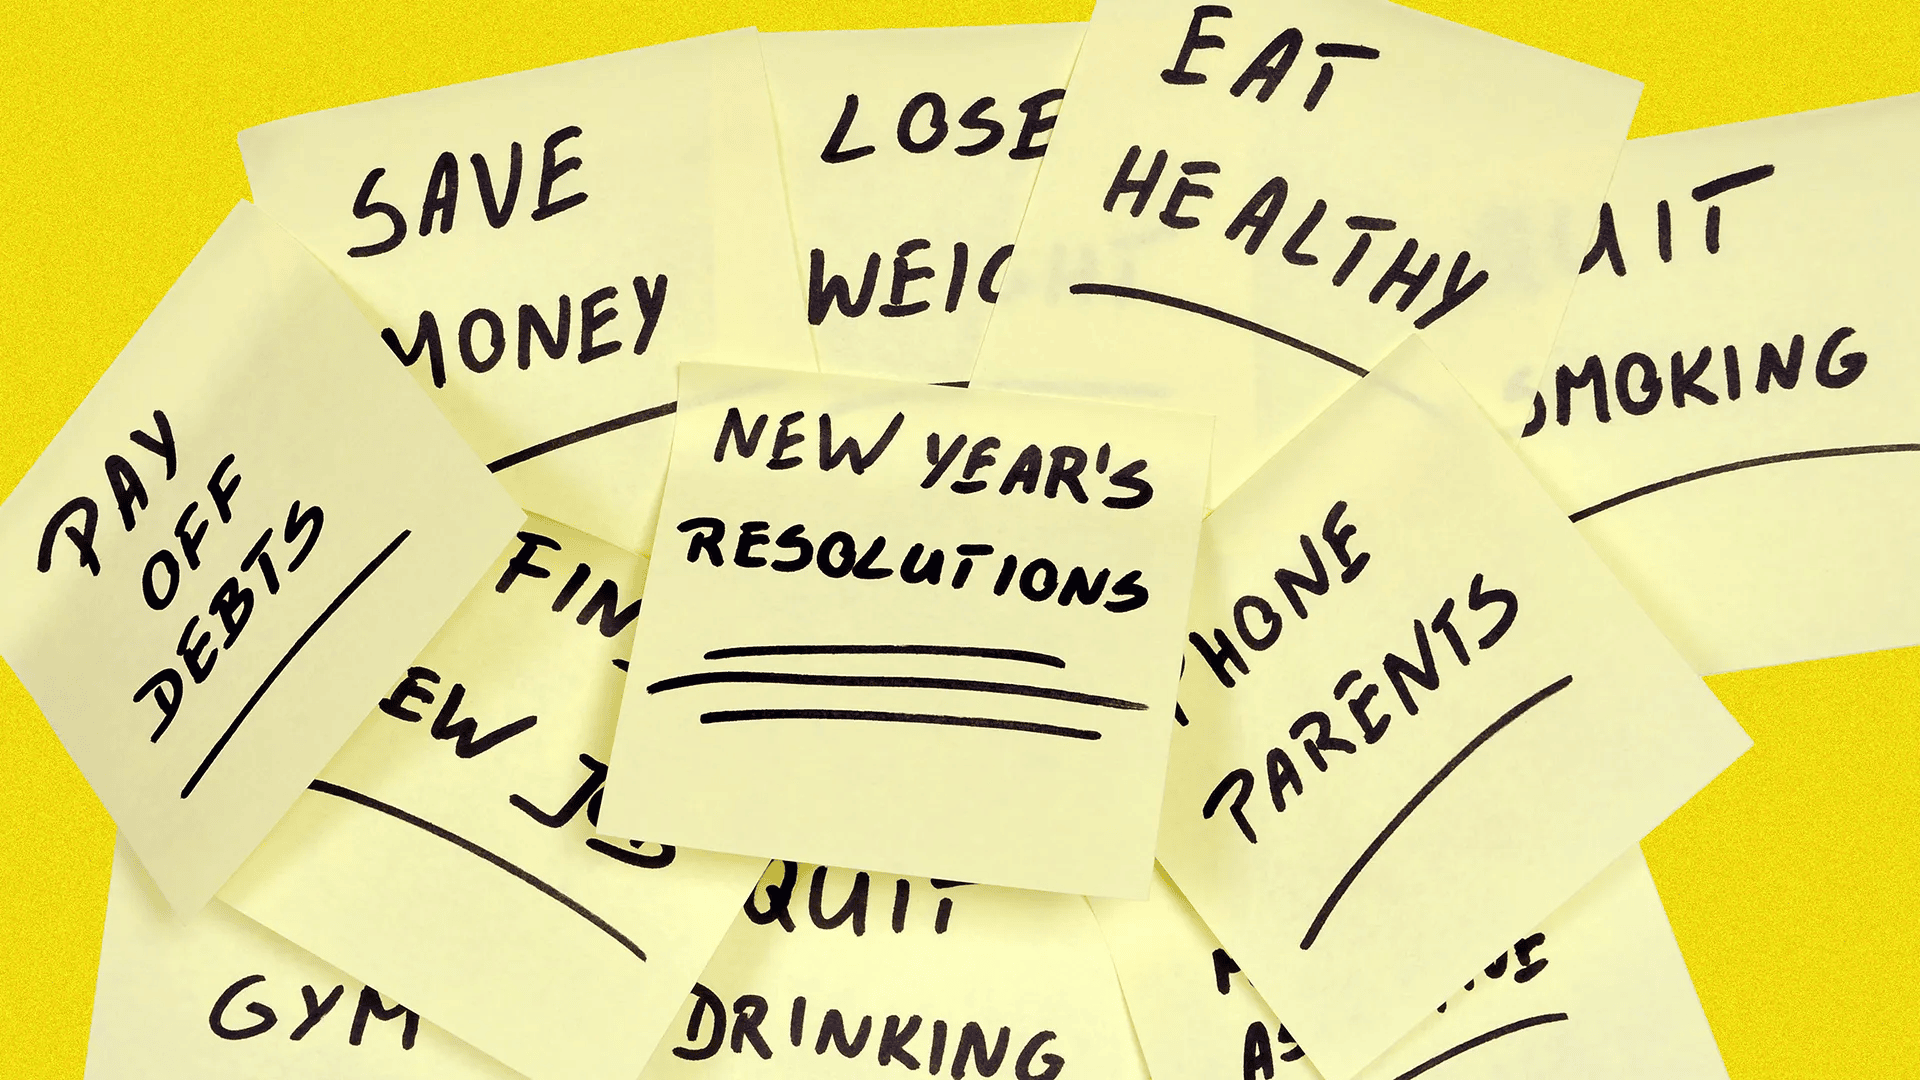 NEW YEAR RESOLUTIONS (1)